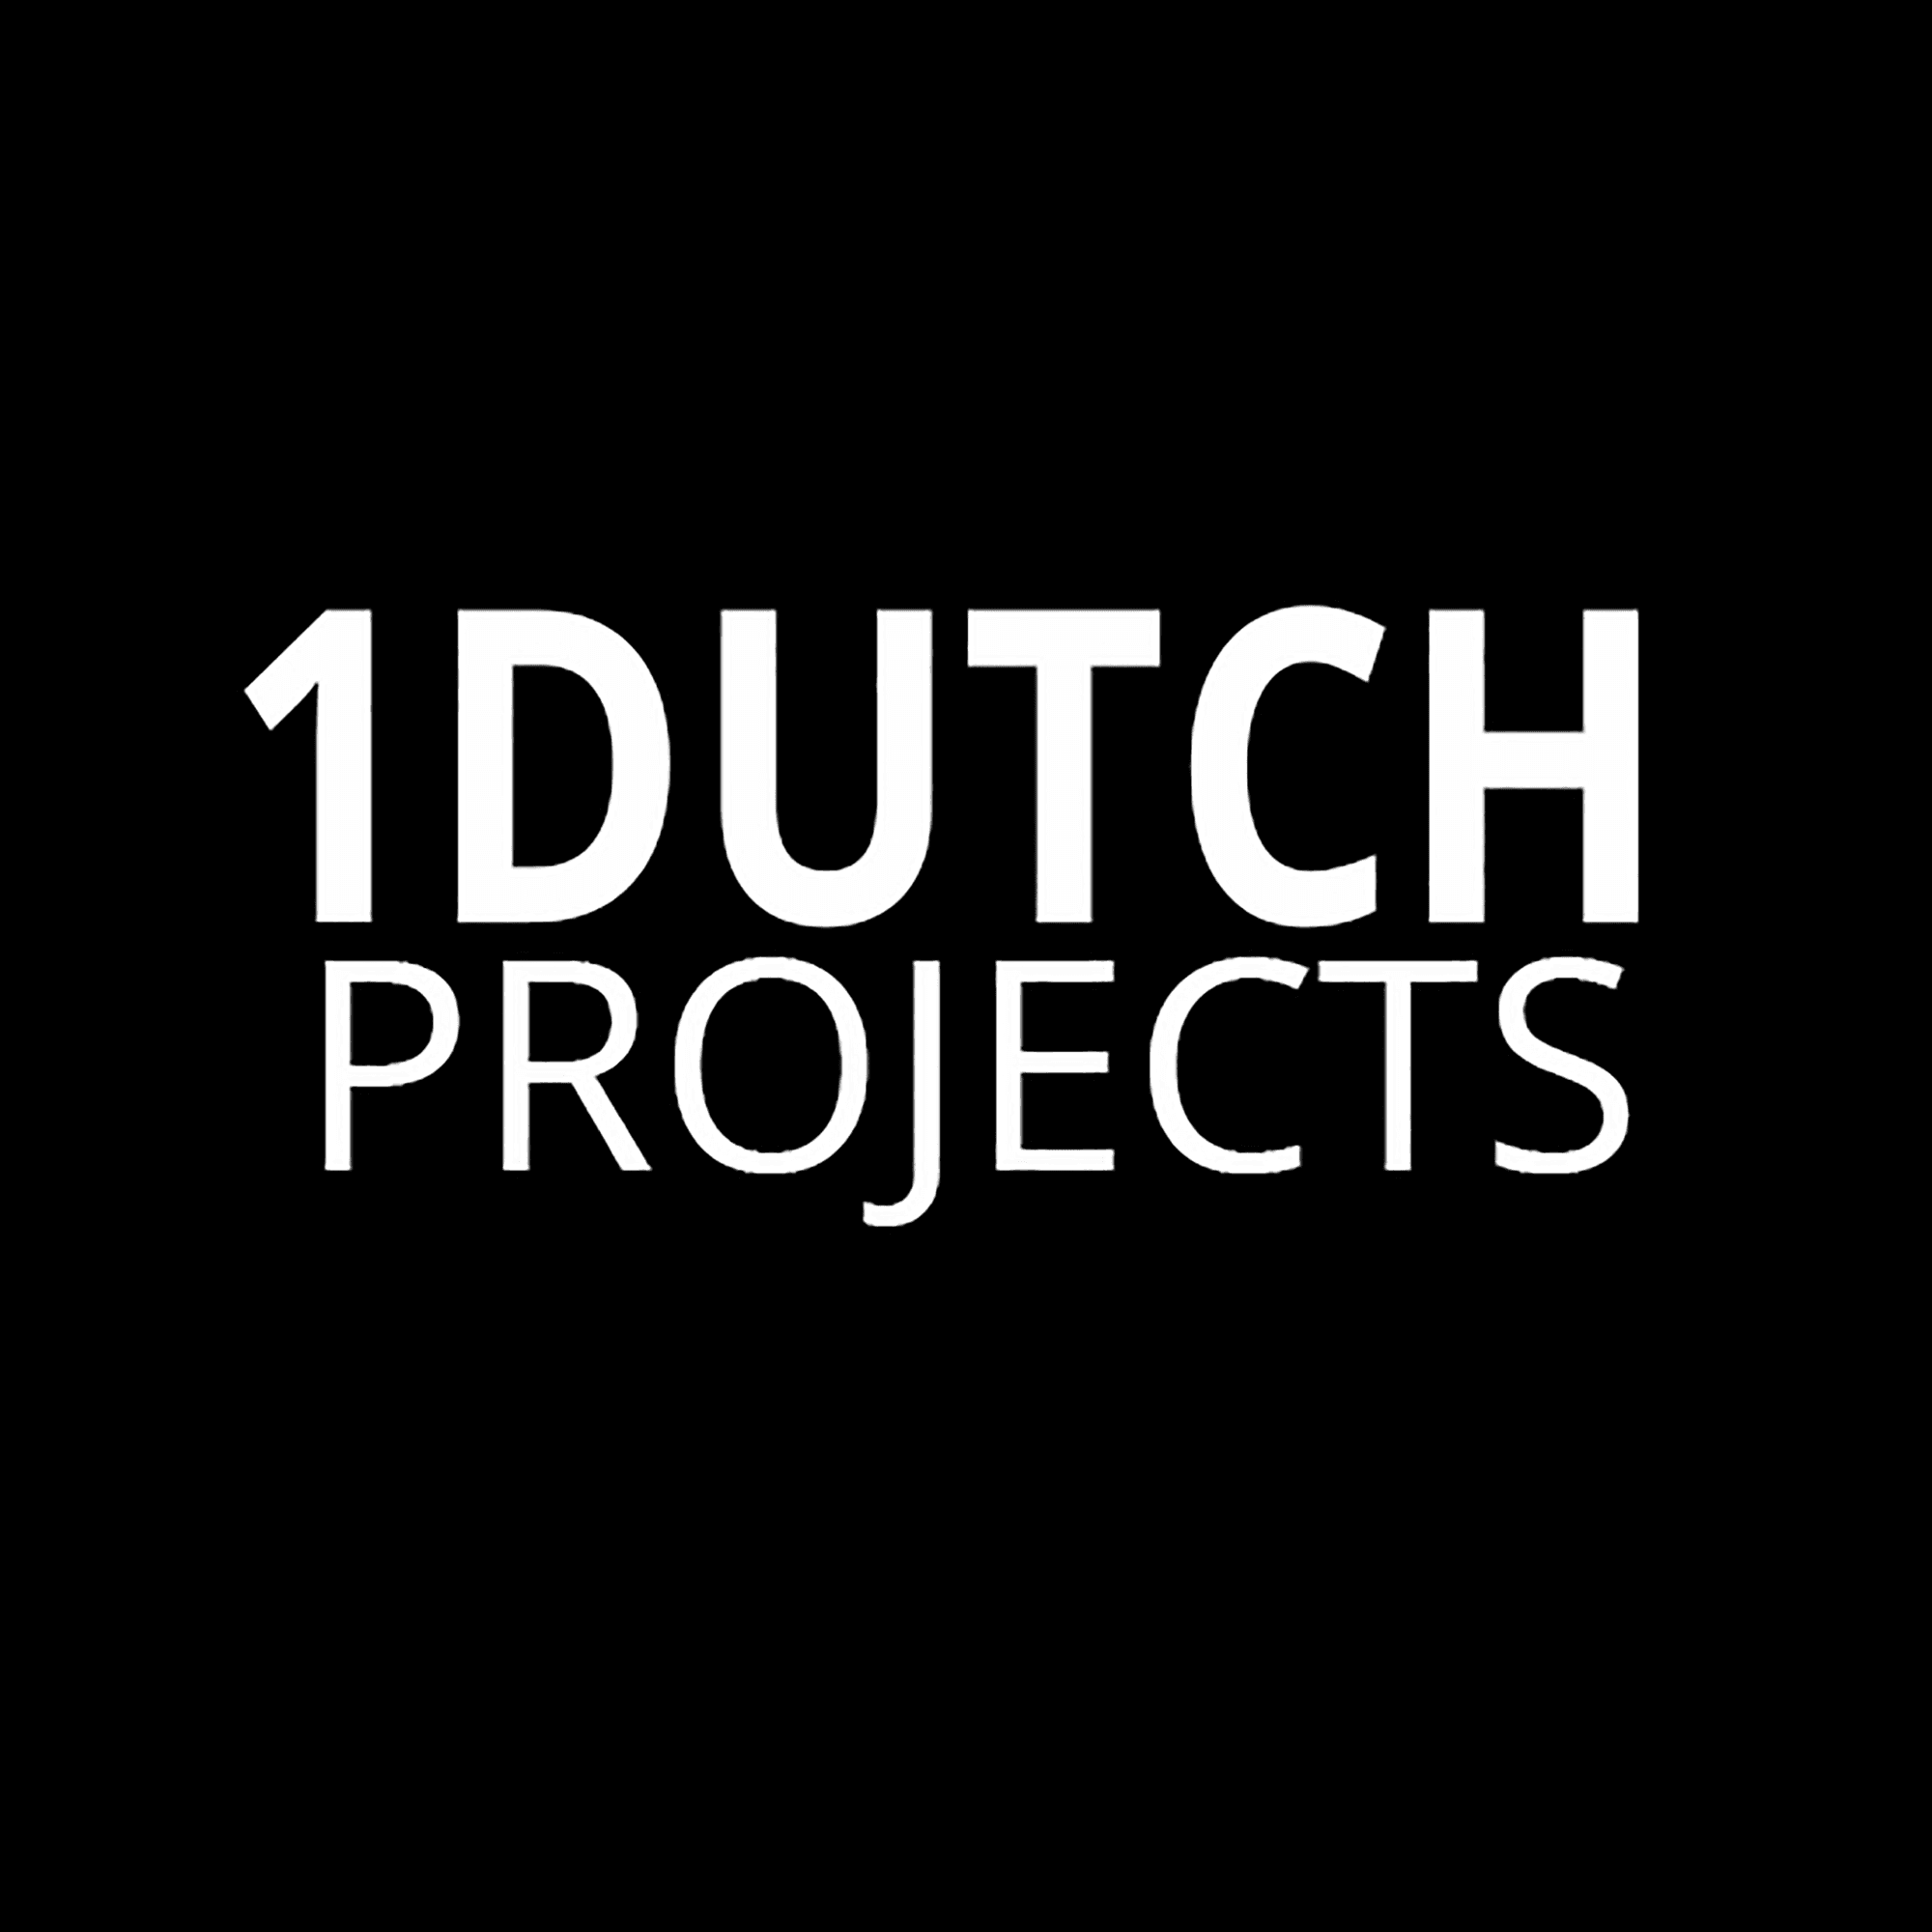 1DutchProjects